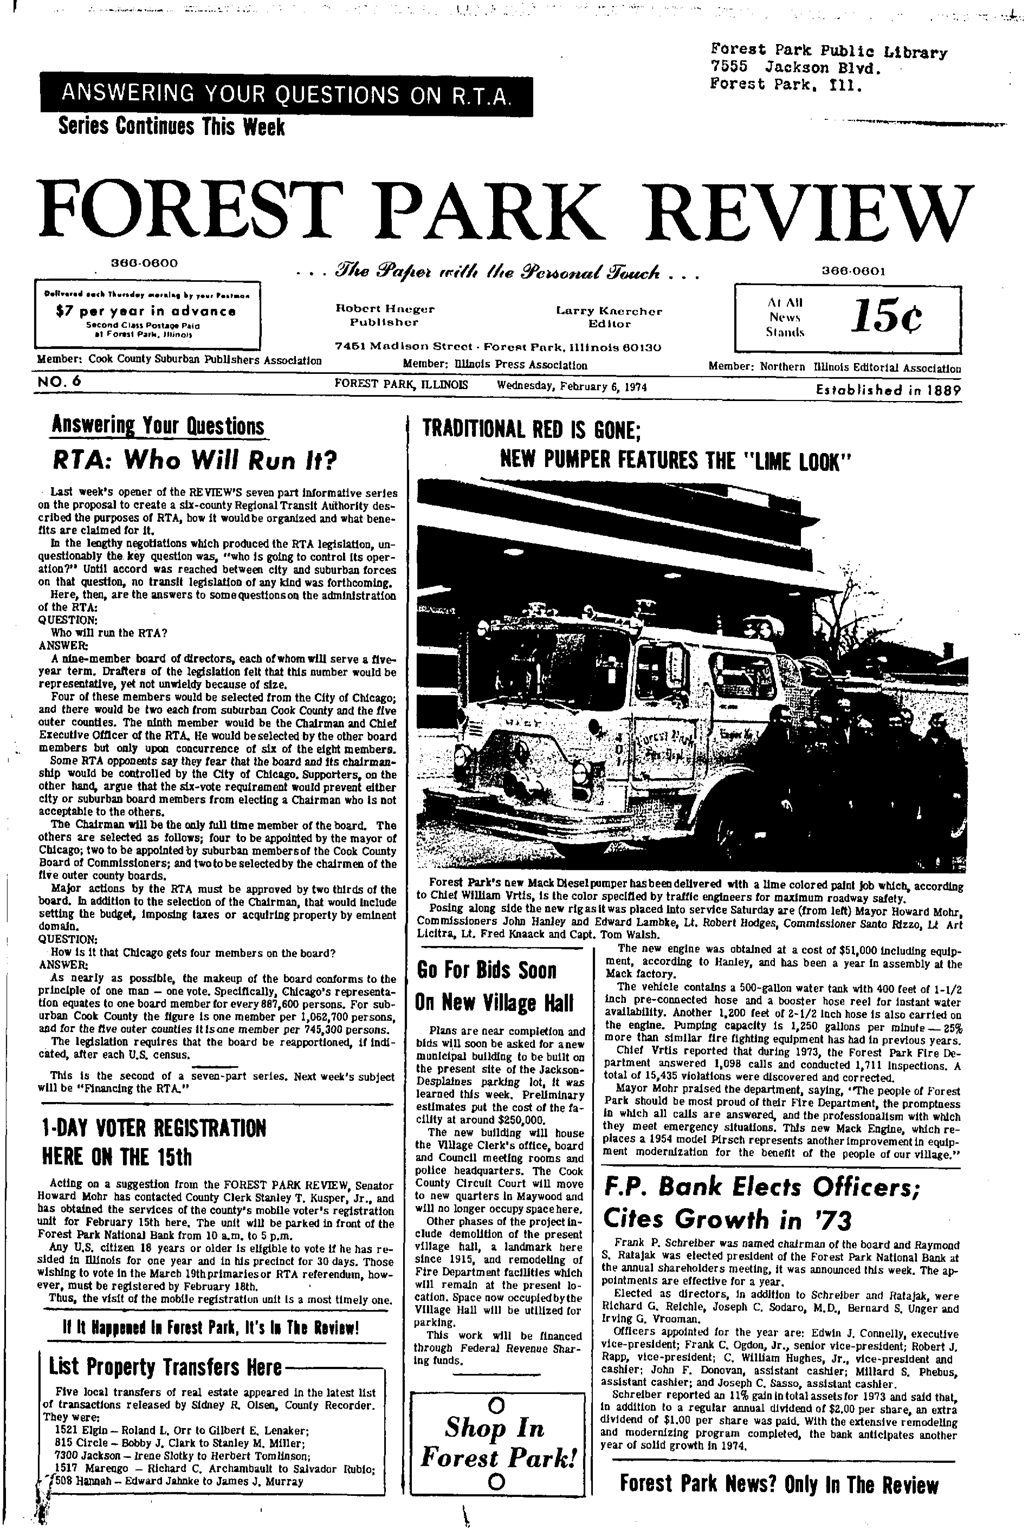 Forest Park Review February 6, 1974